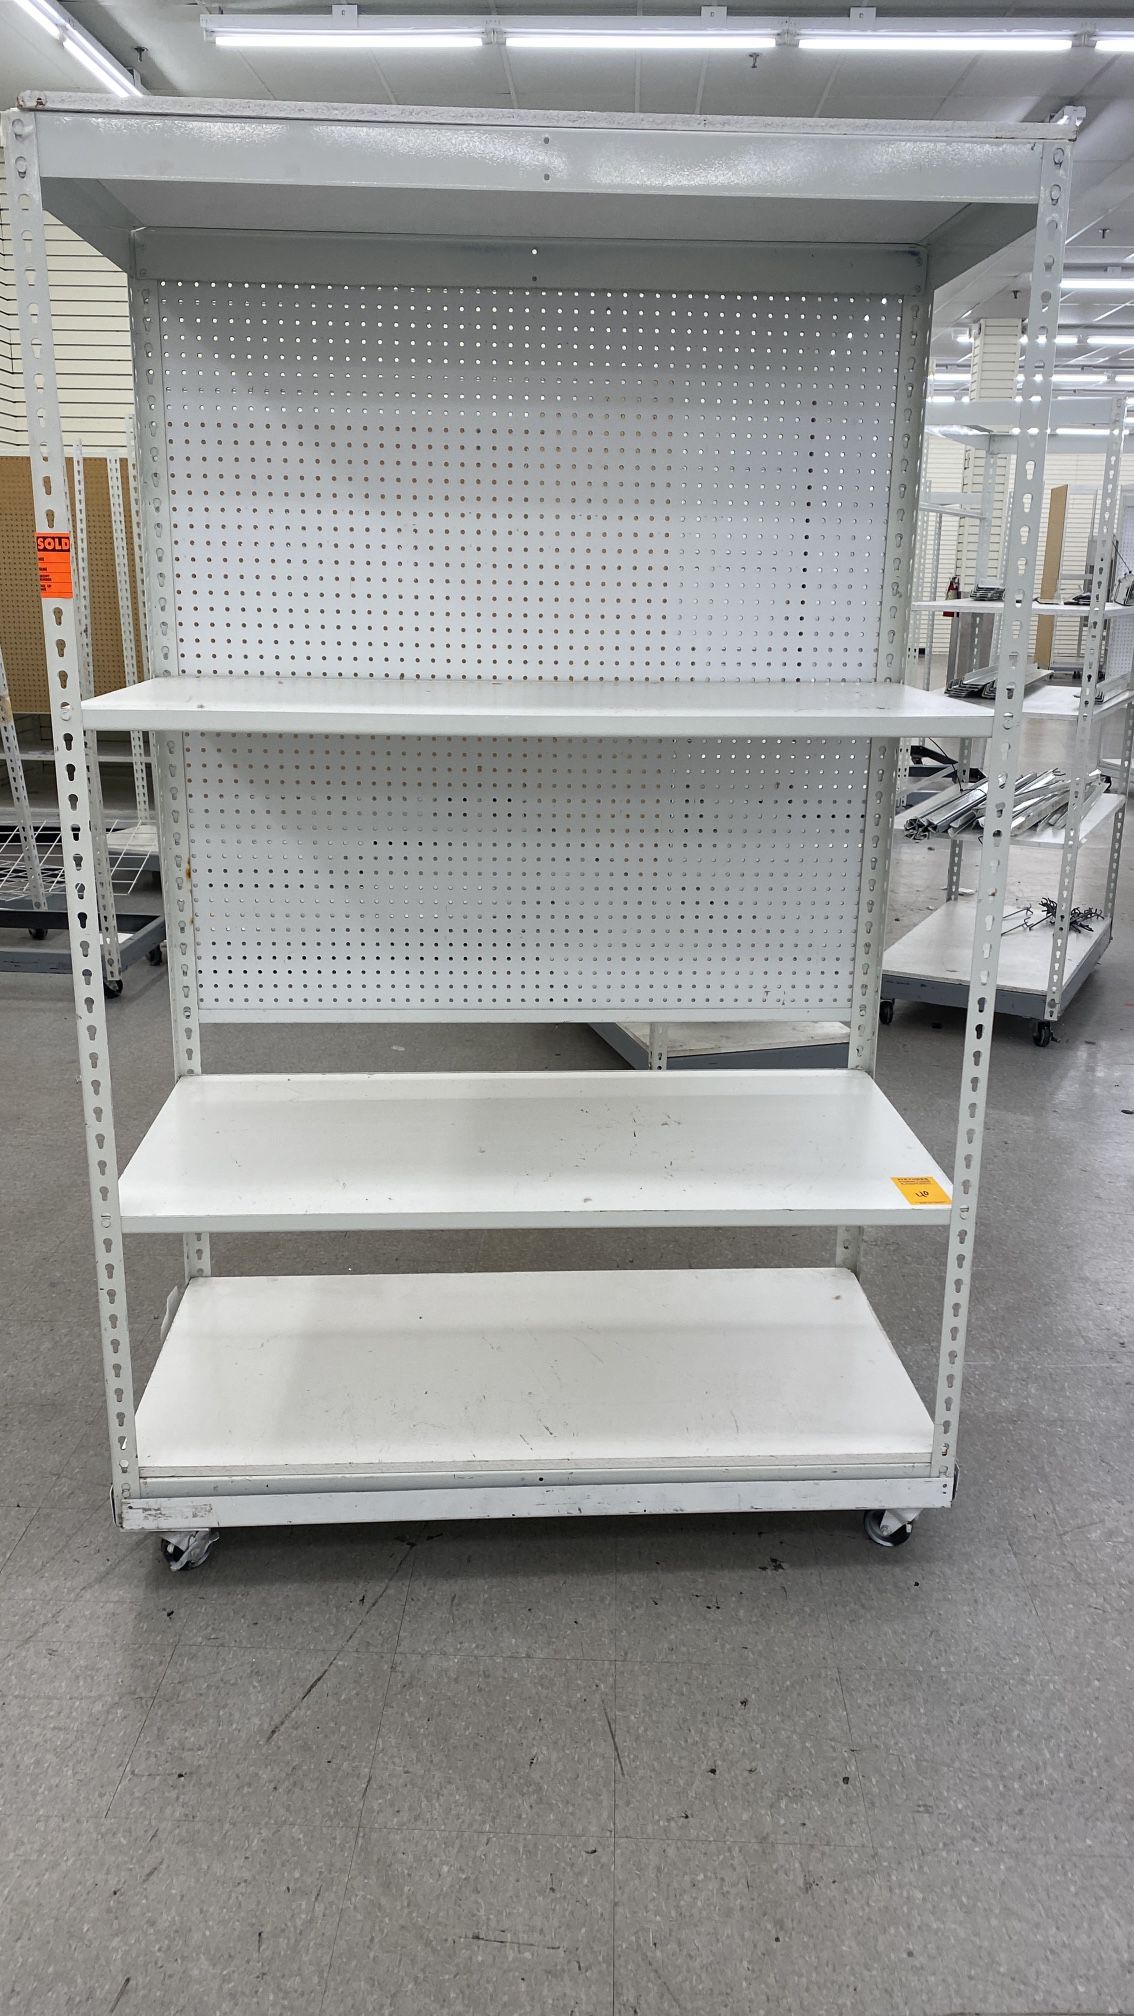 Rolling Wide Span Storage Shelving, 4-6 Adjustable Shelves & Pegboard (76”H x 48”W x 25”D) - Delivery